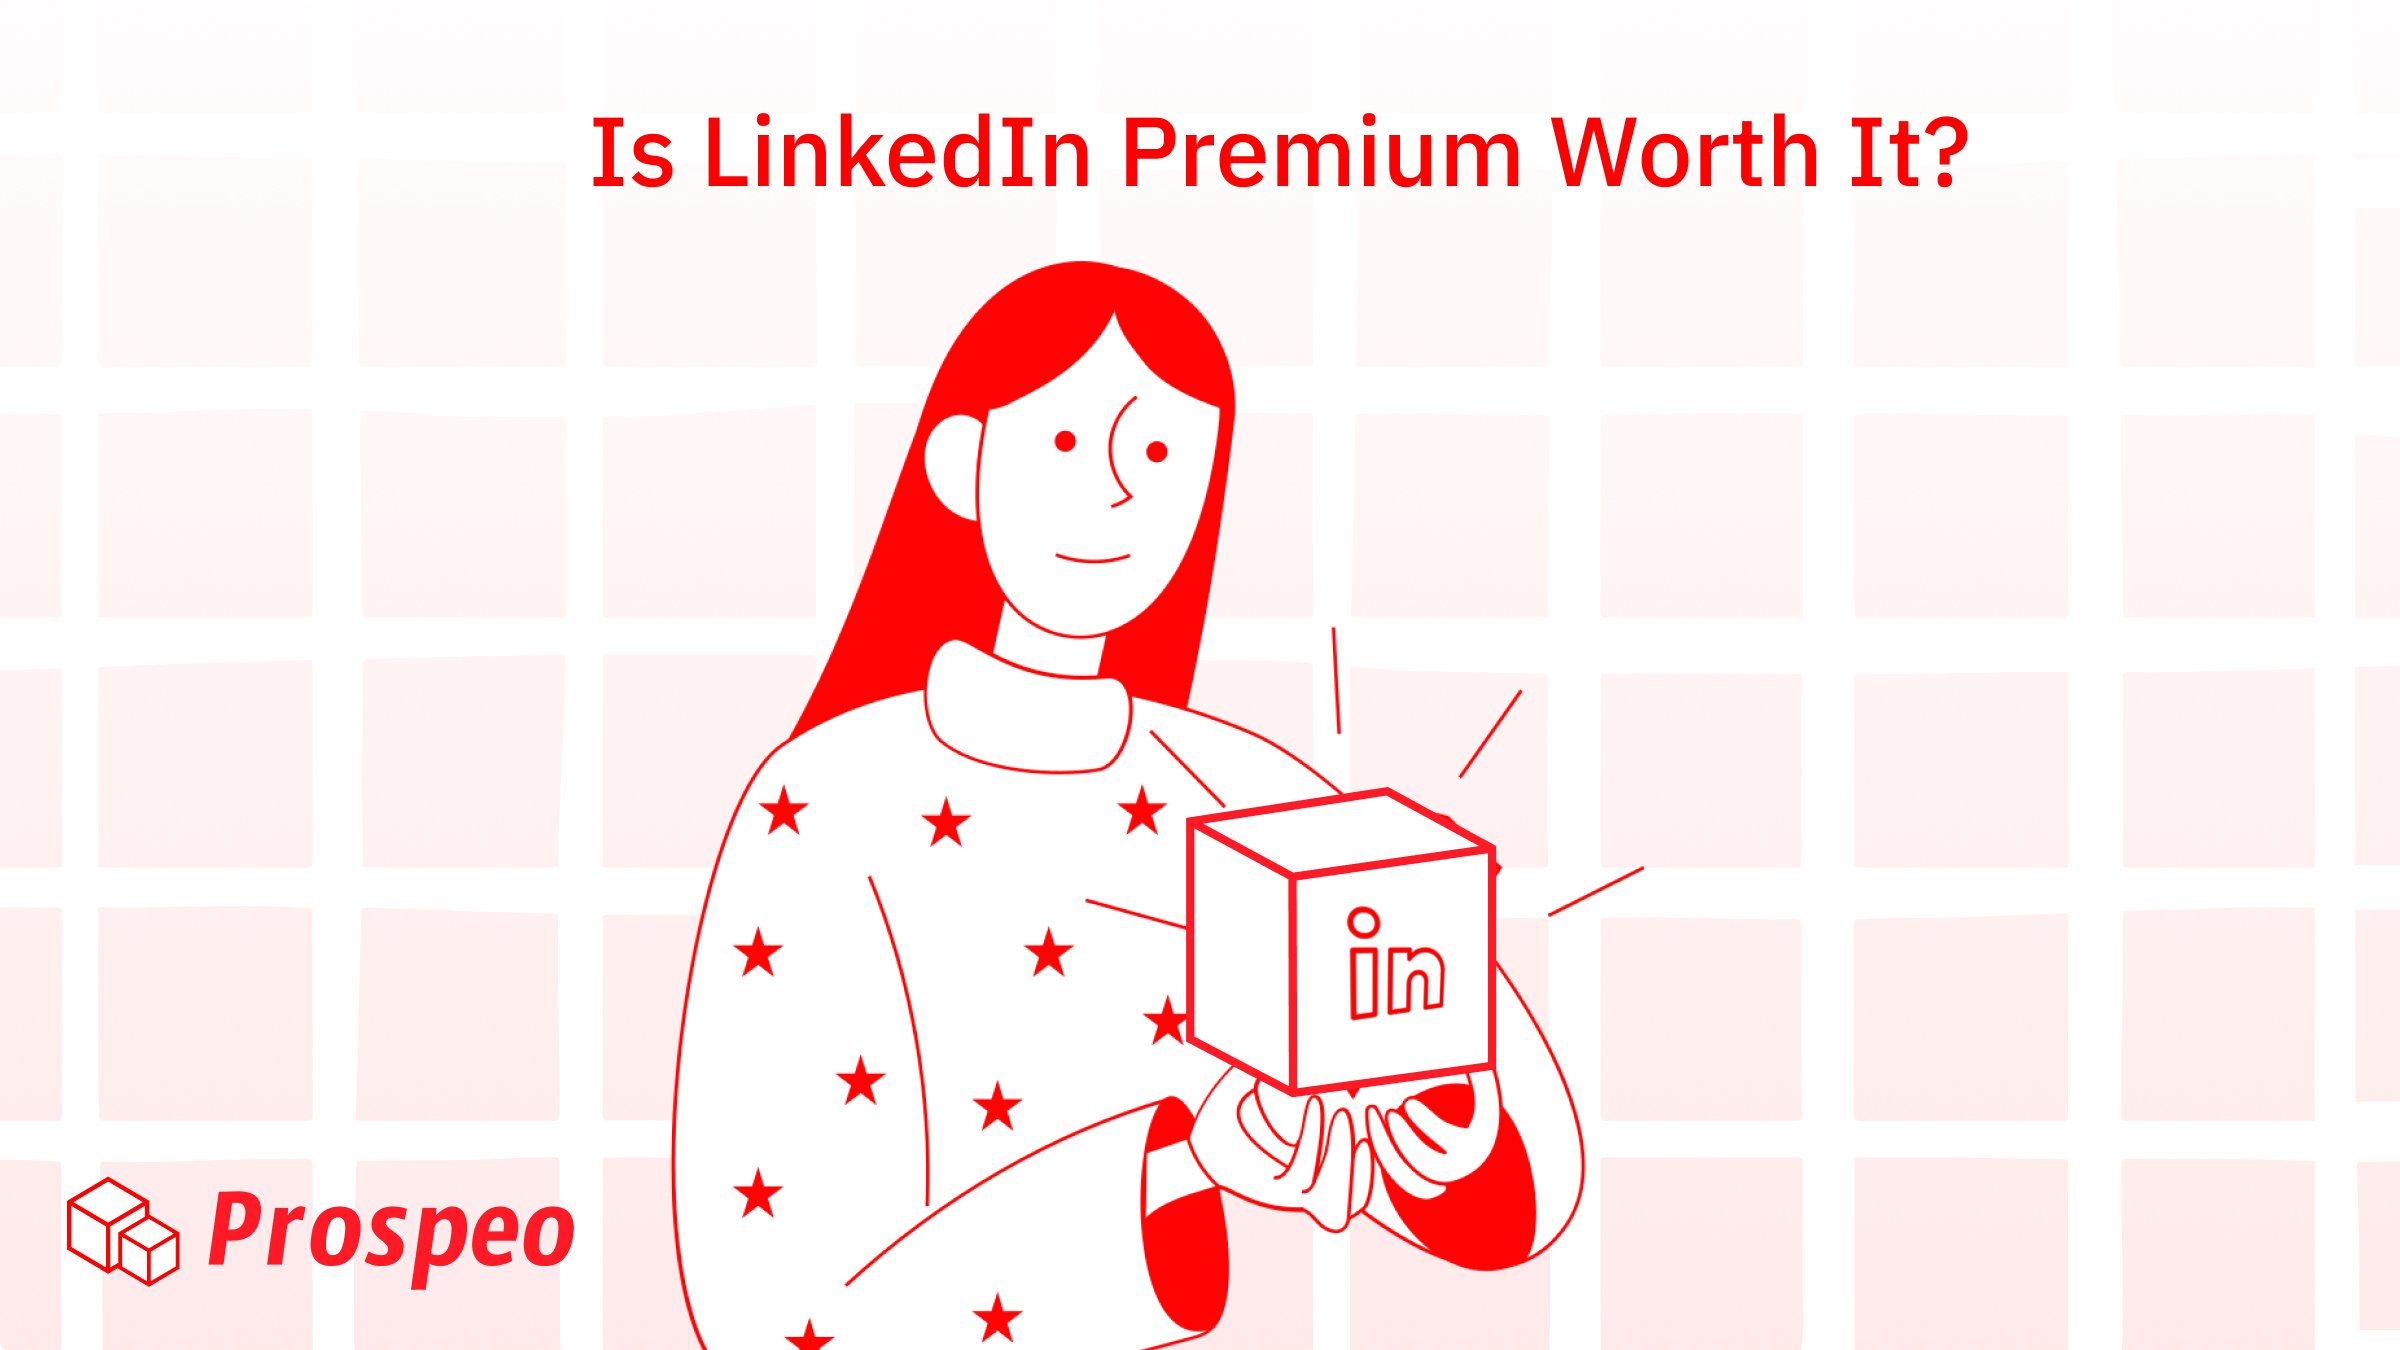 How Much Is LinkedIn Premium? And Is LinkedIn Premium Worth It? Find Out  from a LinkedIn